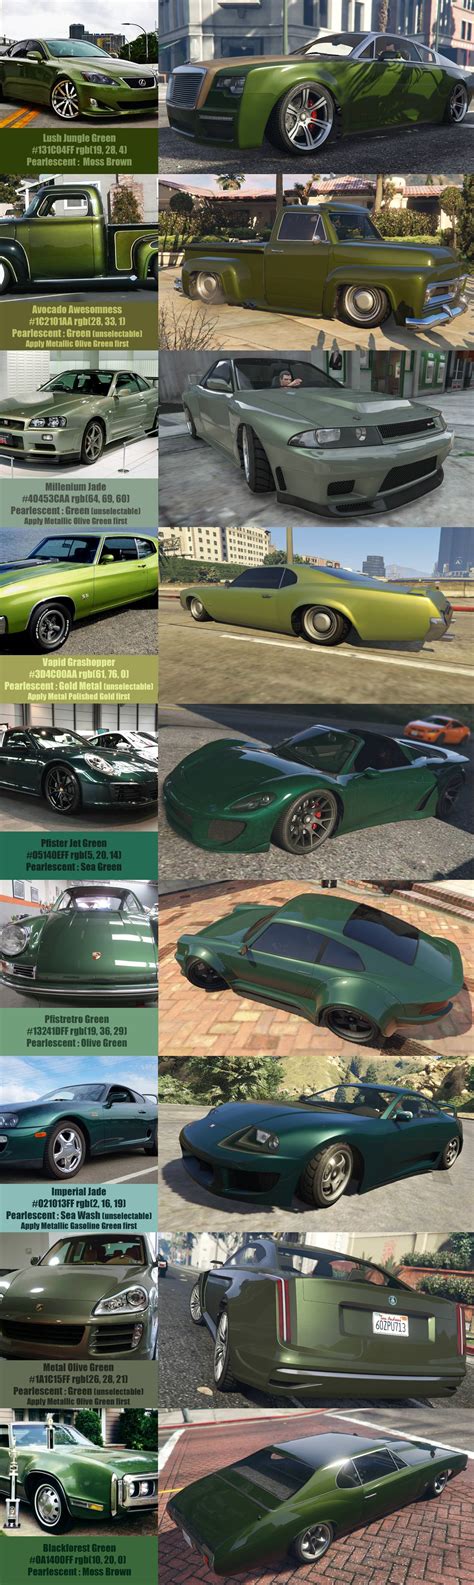 GTA IV - GTAForums. Home. Grand Theft Auto. Reminder: Modding questions belong in the modding forums! Click me to go to them. GTA Online New Bonuses for 12th Oct 2023 - Ghostbusters Needed in San Andreas! New Events, Three New Deathmatches, the Albany Brigham & More! 🛸 👻.. 